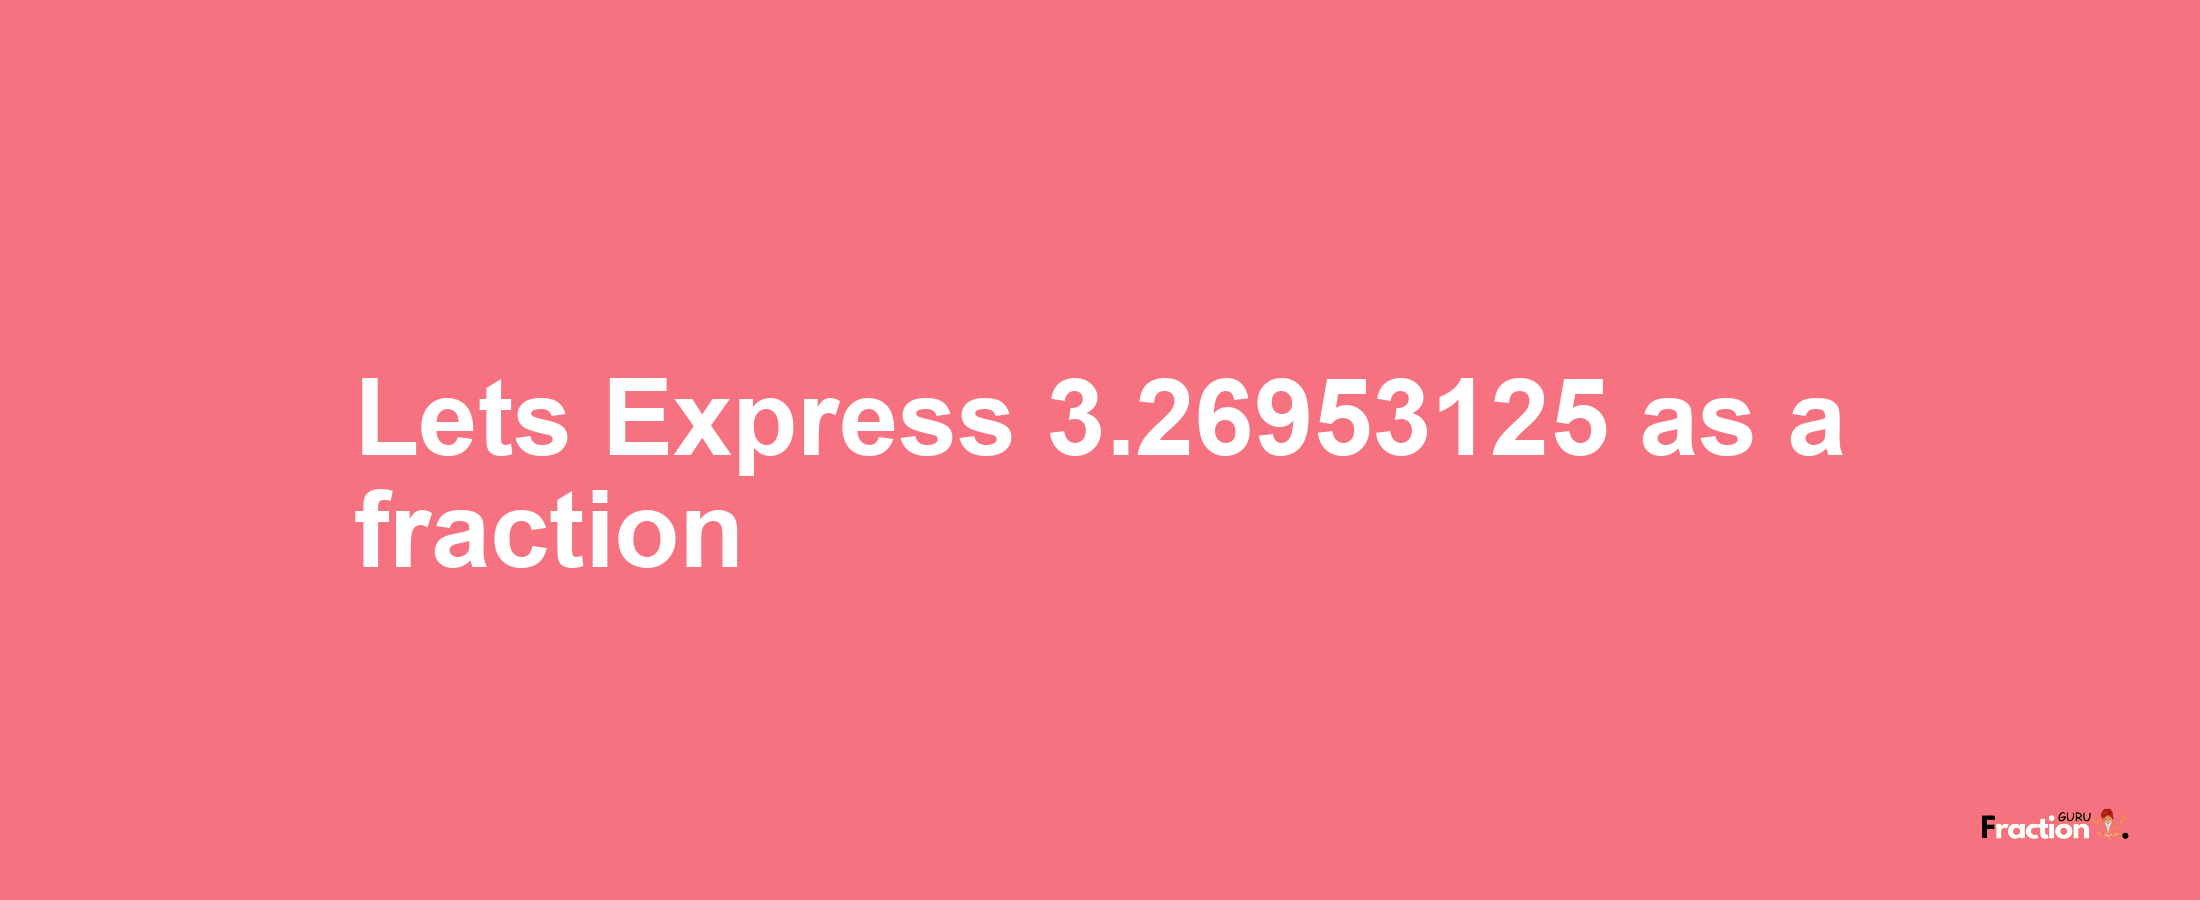 Lets Express 3.26953125 as afraction